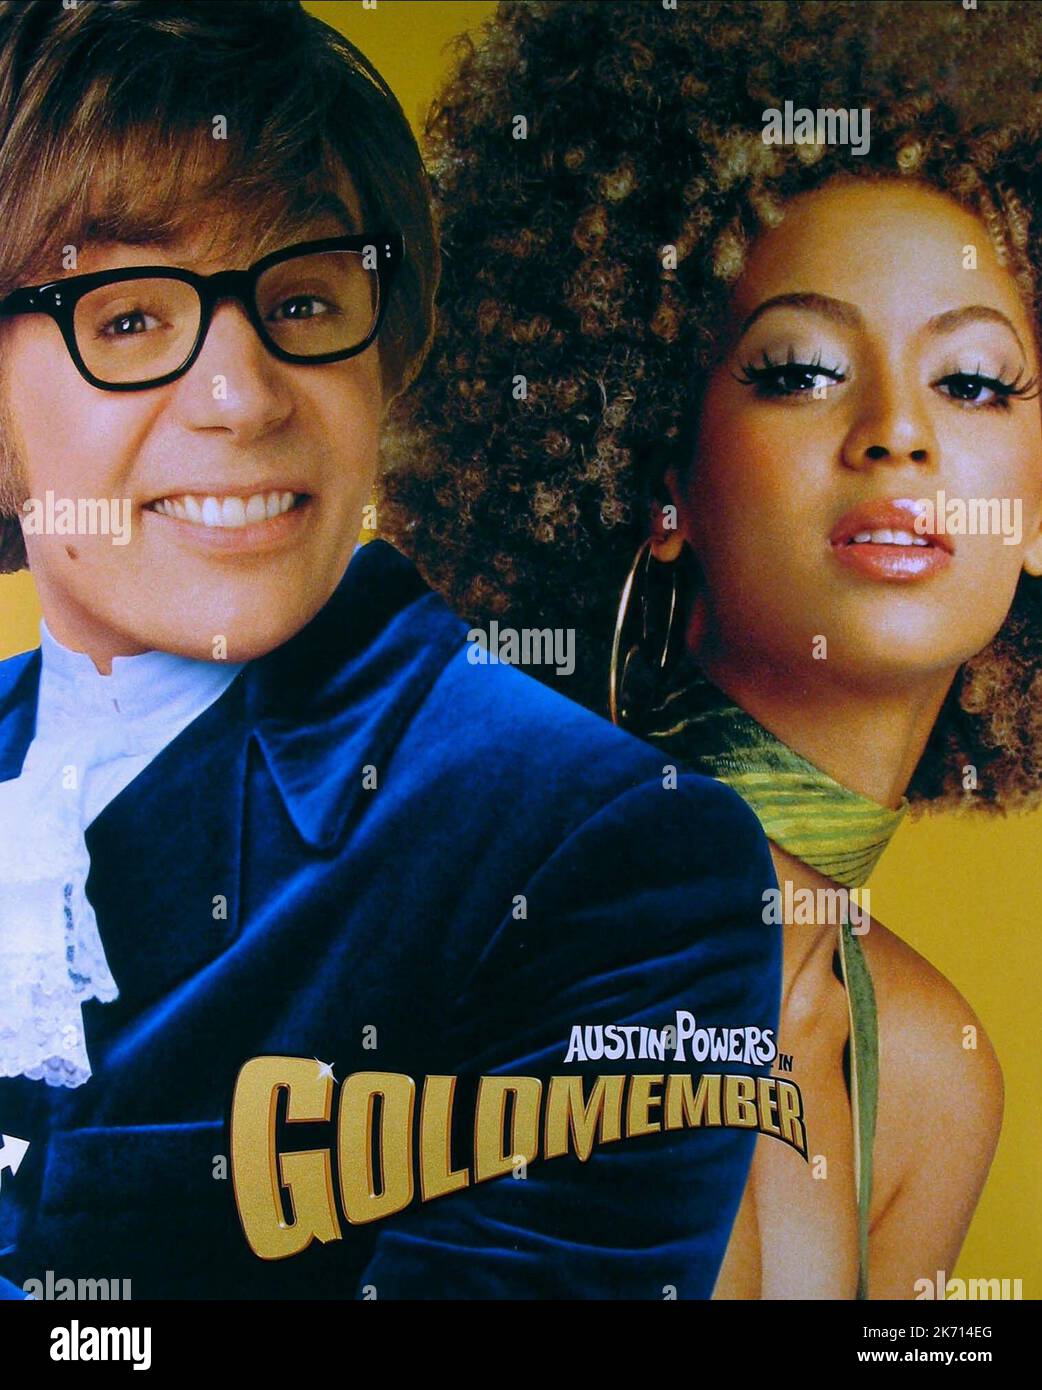 MIKE MYERS, Beyonce Knowles, Austin Powers IN GOLDMEMBER, 2002 Stockfoto